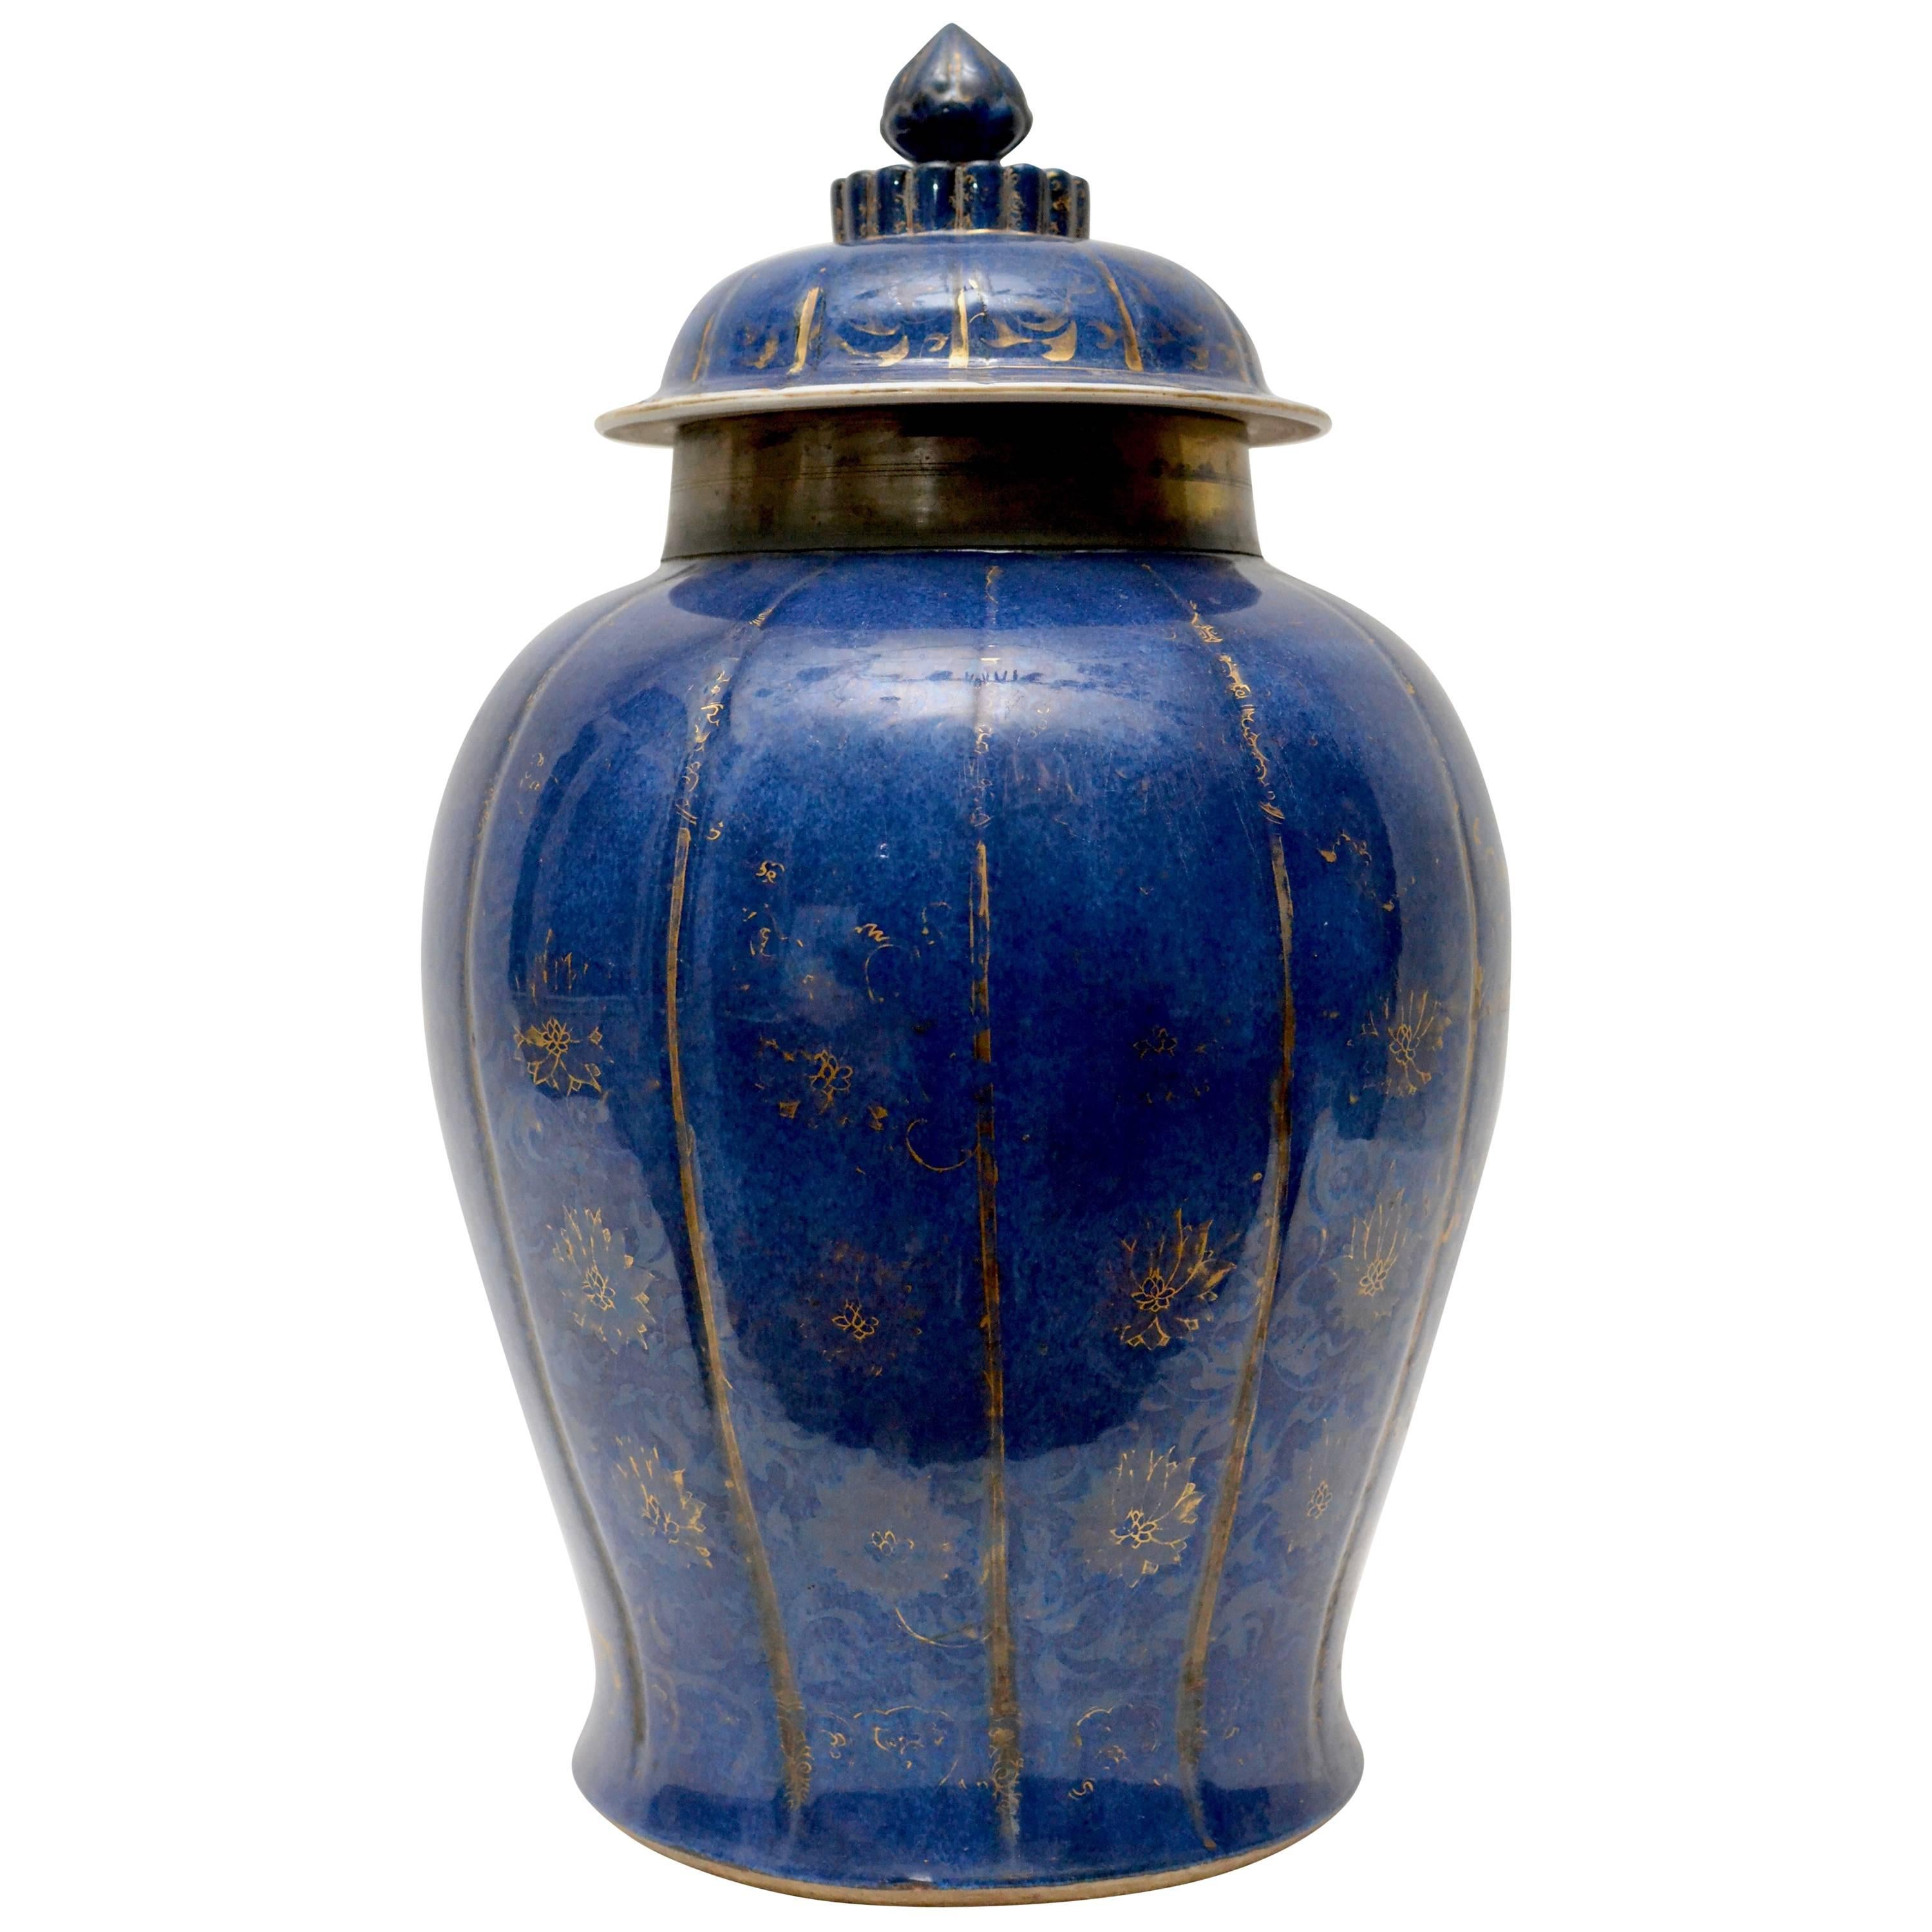 Chinese Powderblue Urn with a Lid from the Kangxi Period (1661-1722)